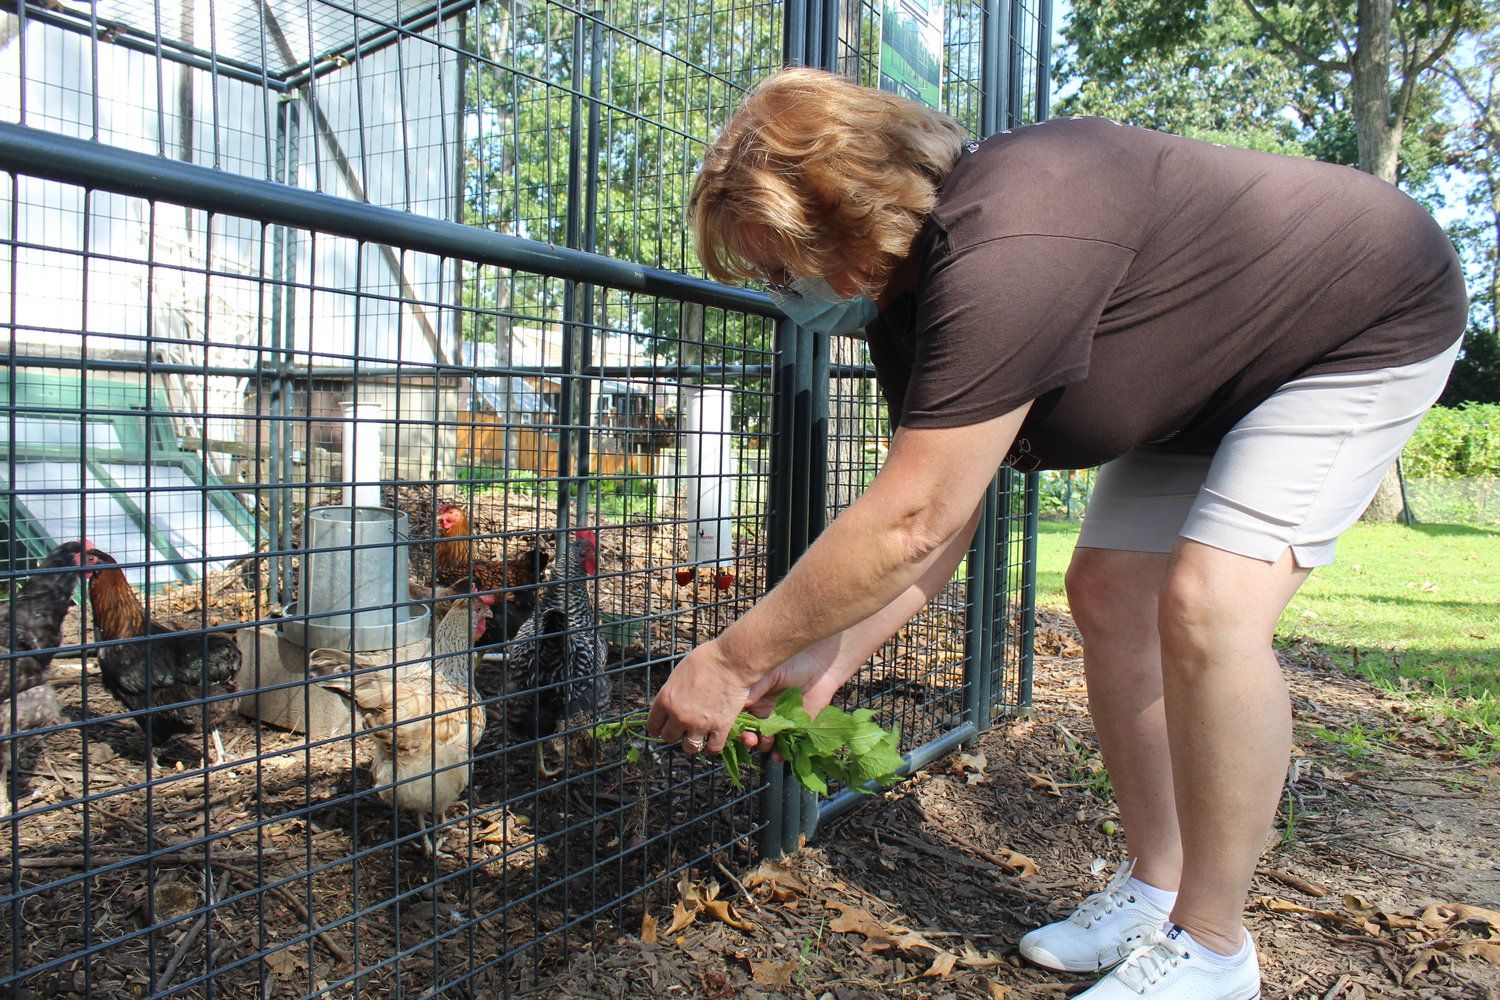 Black, of North Bellmore, fed some leafy greens to the chickens at St. Francis Episcopal Church.